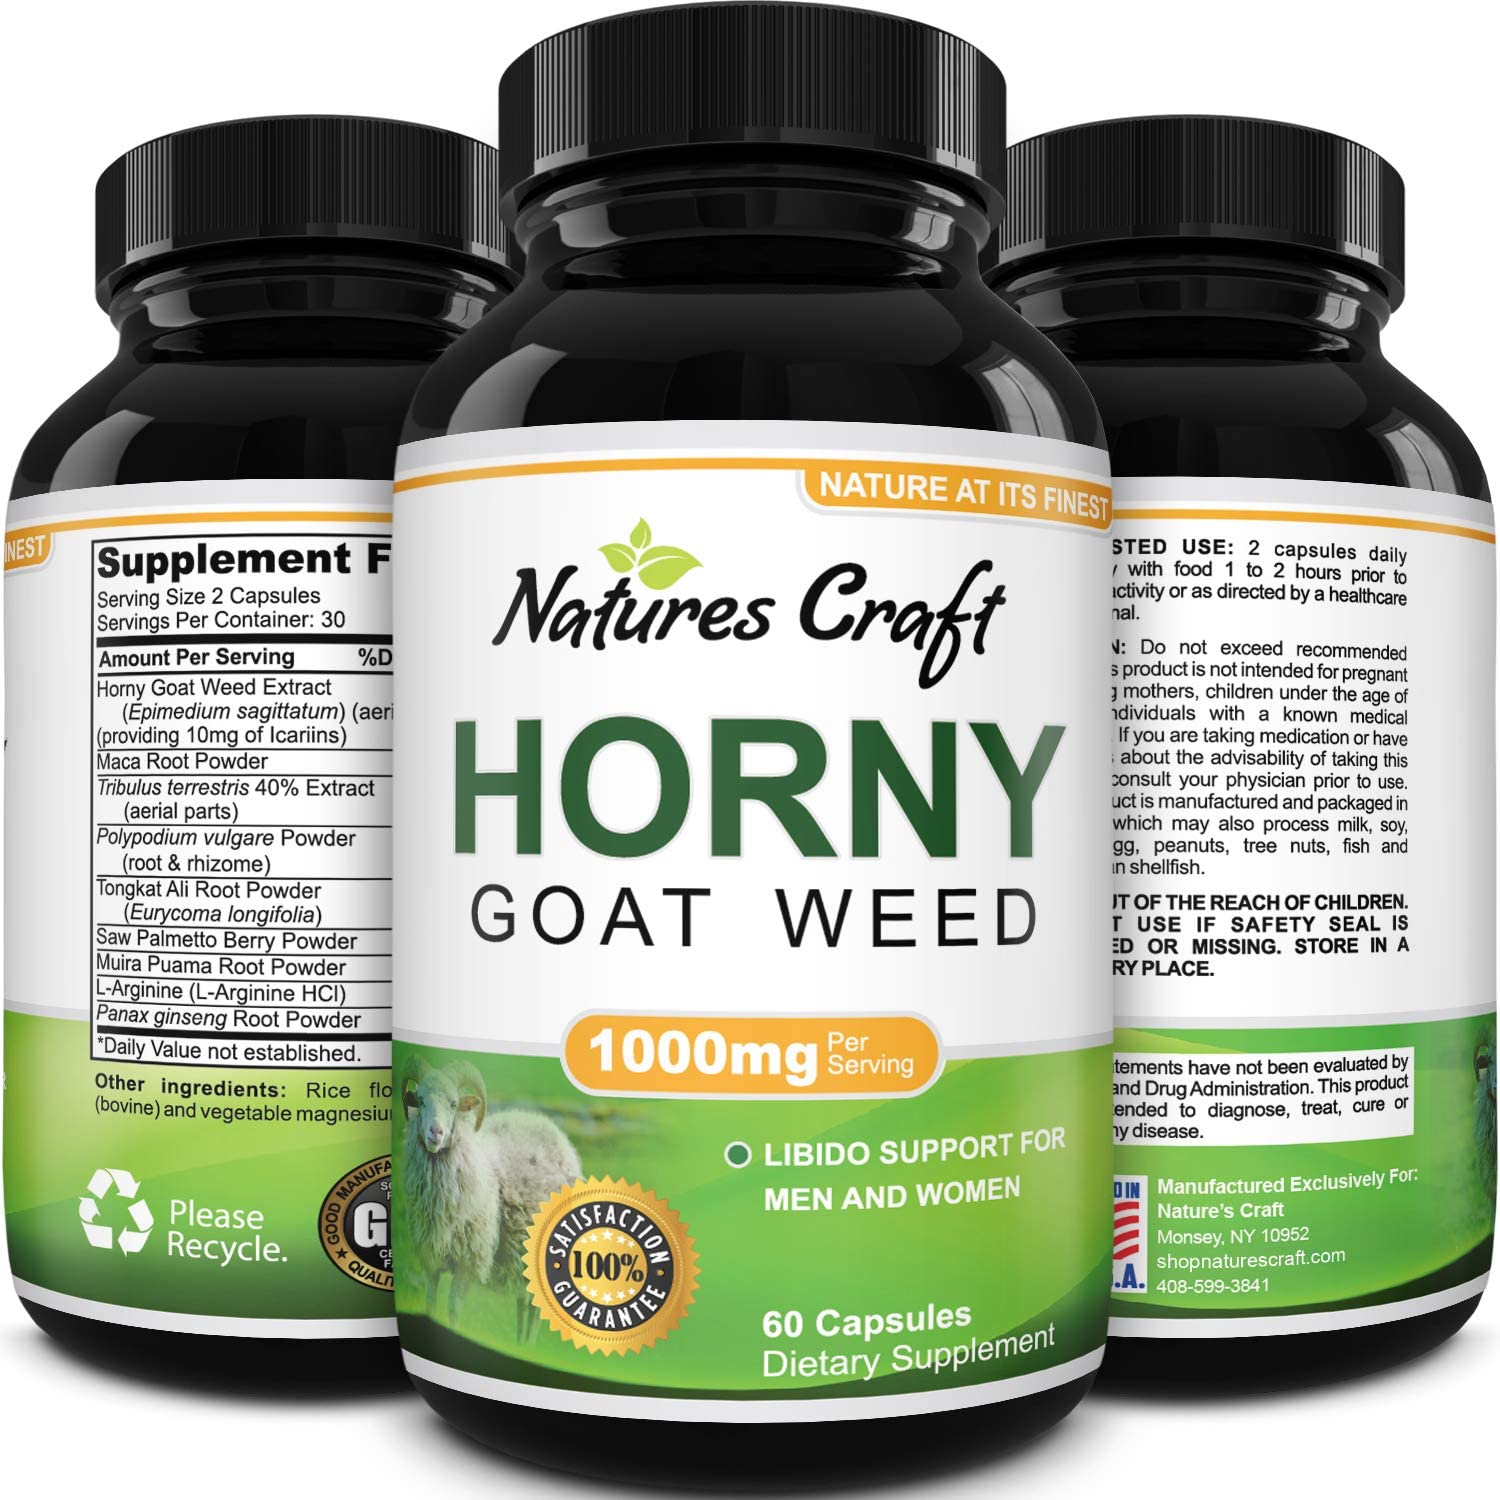 Benefits of Horny Goat Weed Other Than Increased Libido